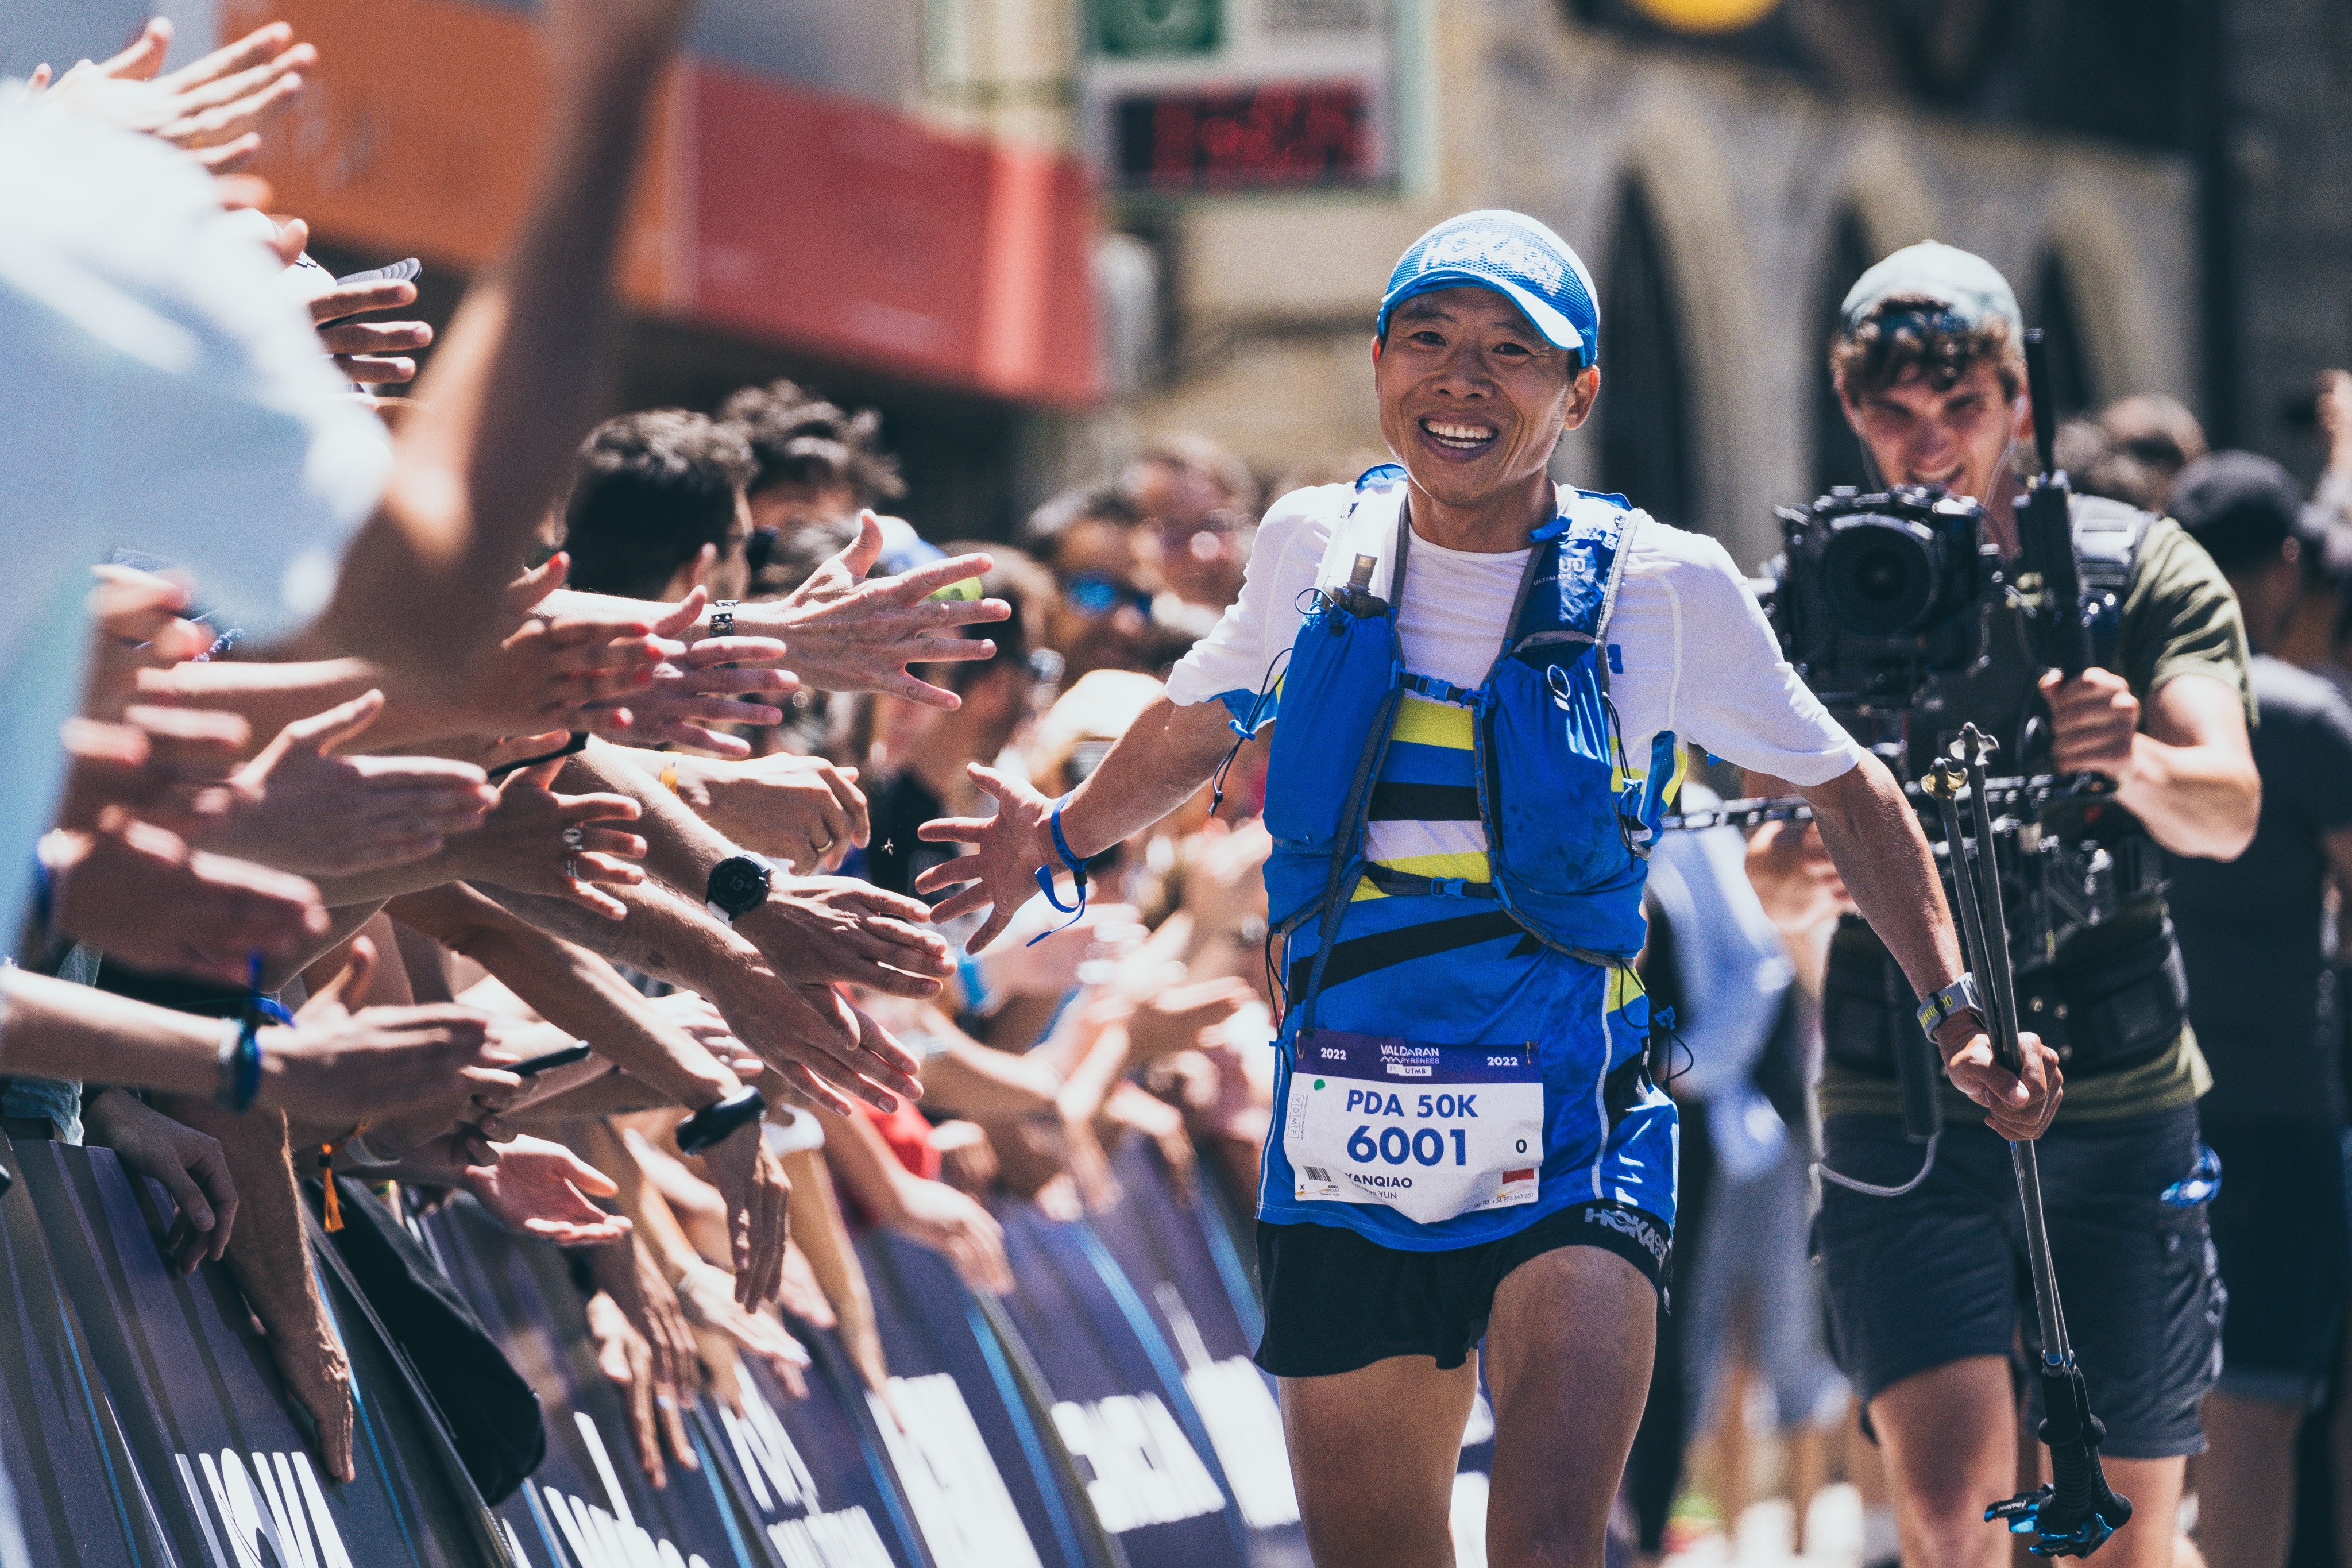 Yun Yanqiao approaches the finish line in first place in the 50km race at the Val d’Aran by UTMB. Photo: Val d’Aran by UTMB/Liqen Studio